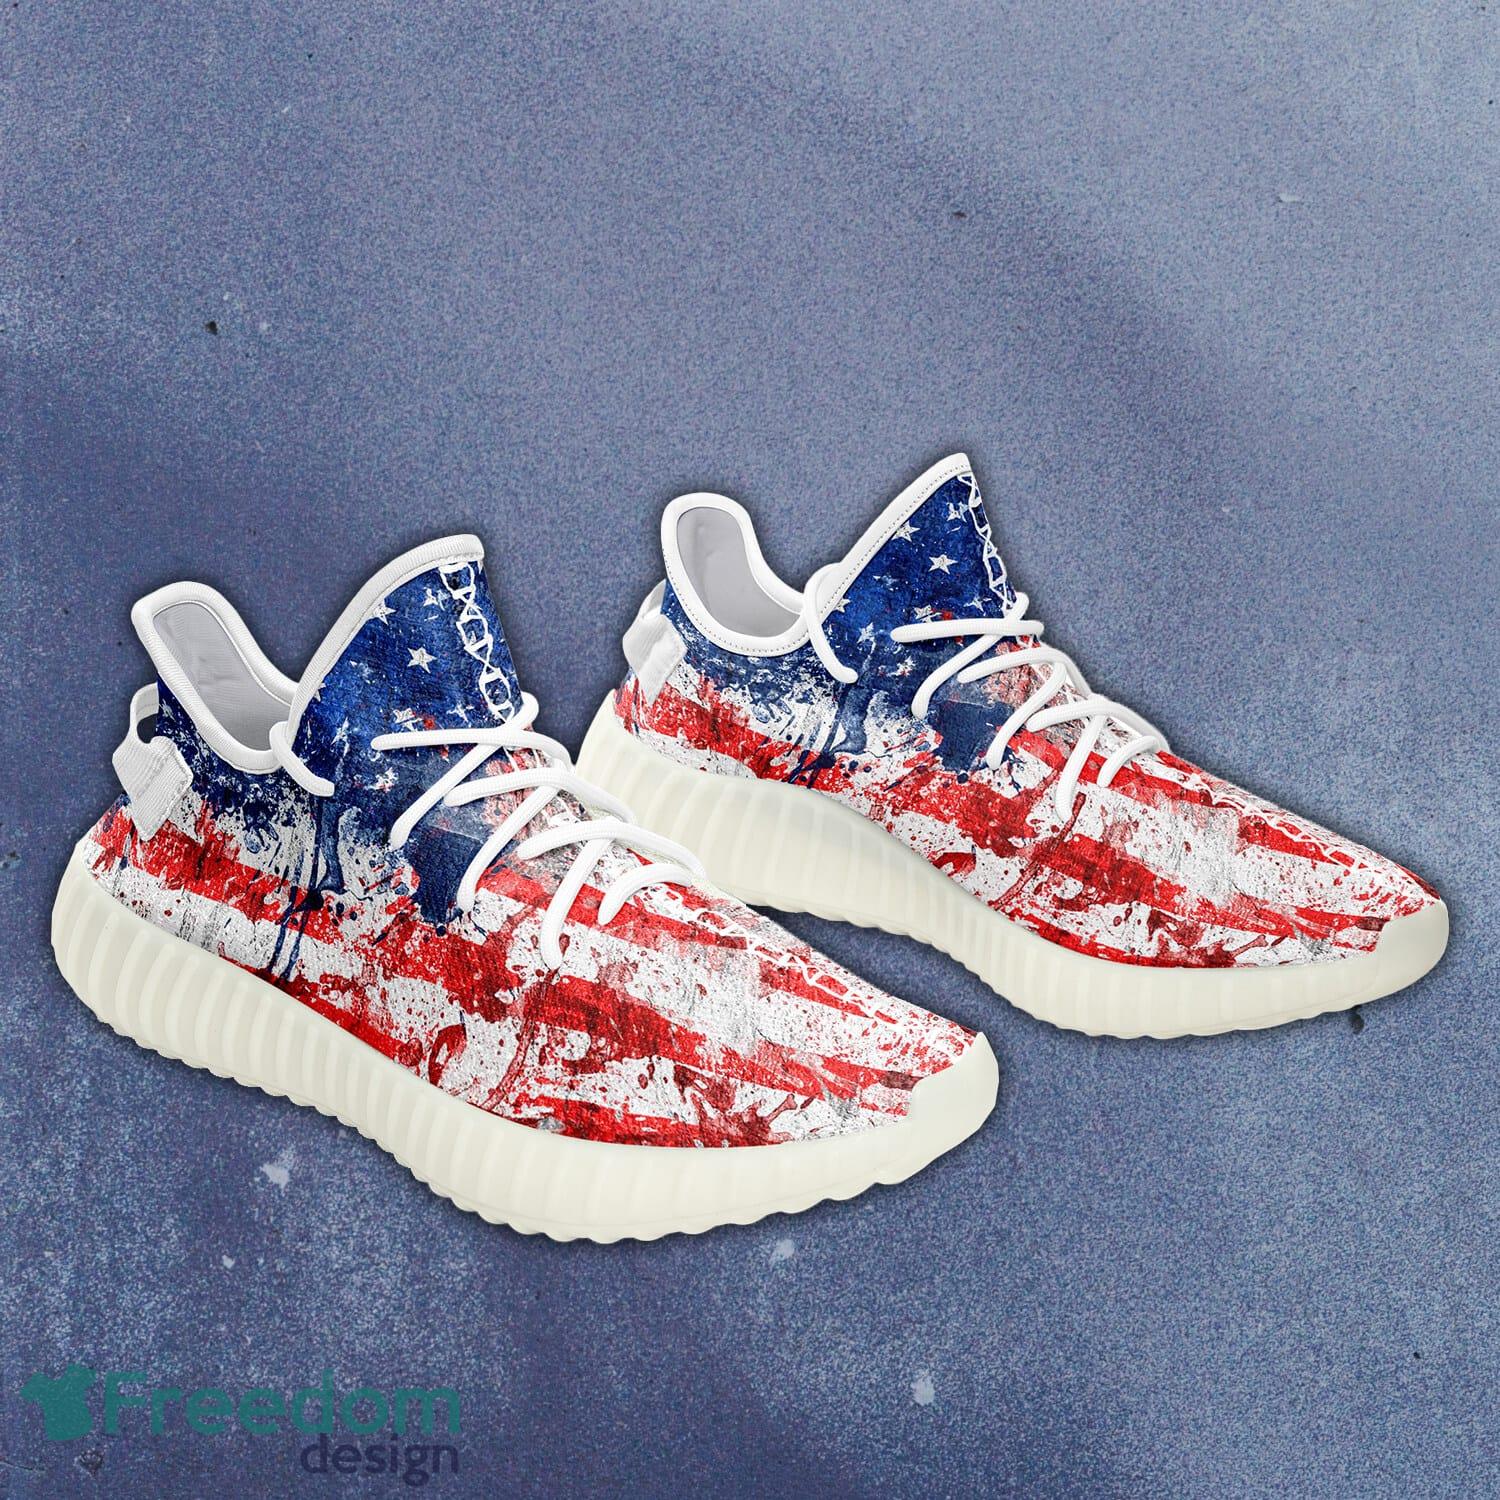 Ugly Christmas Sweater Yeezy Boost 350 V2, Custom Shoes